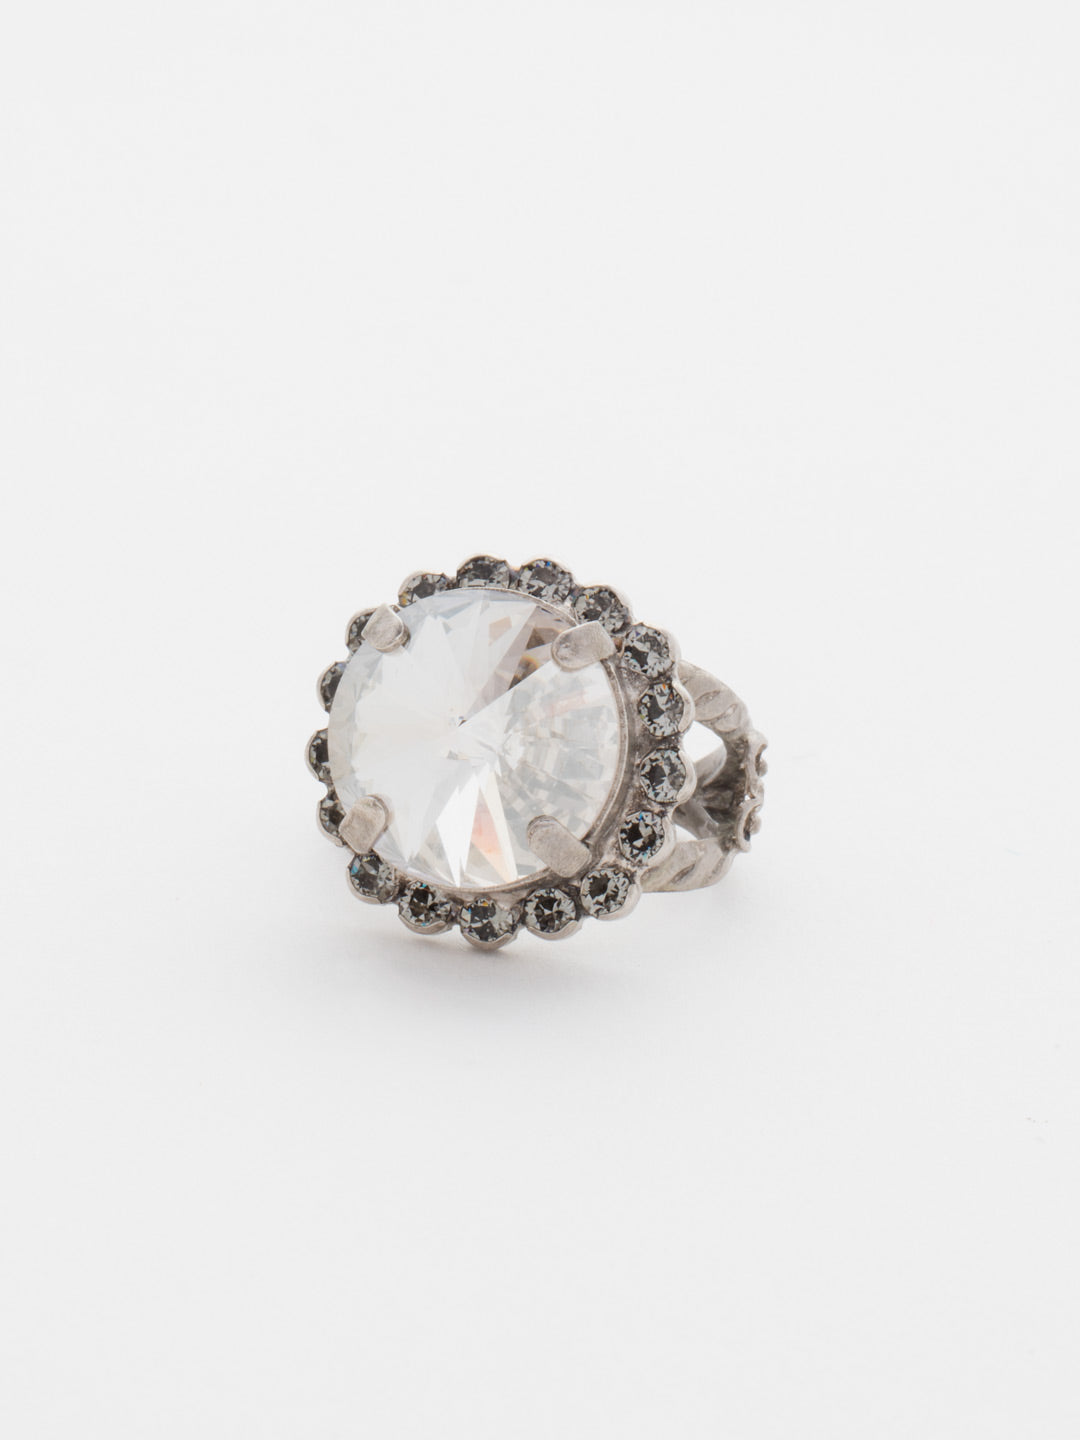 Round Cut Cocktail Ring - RCR60ASCRO - <p>Antique inspired and perfect for everyday! Wear this ring for a little extra sparkle on your digits! From Sorrelli's Crystal Rock collection in our Antique Silver-tone finish.</p>